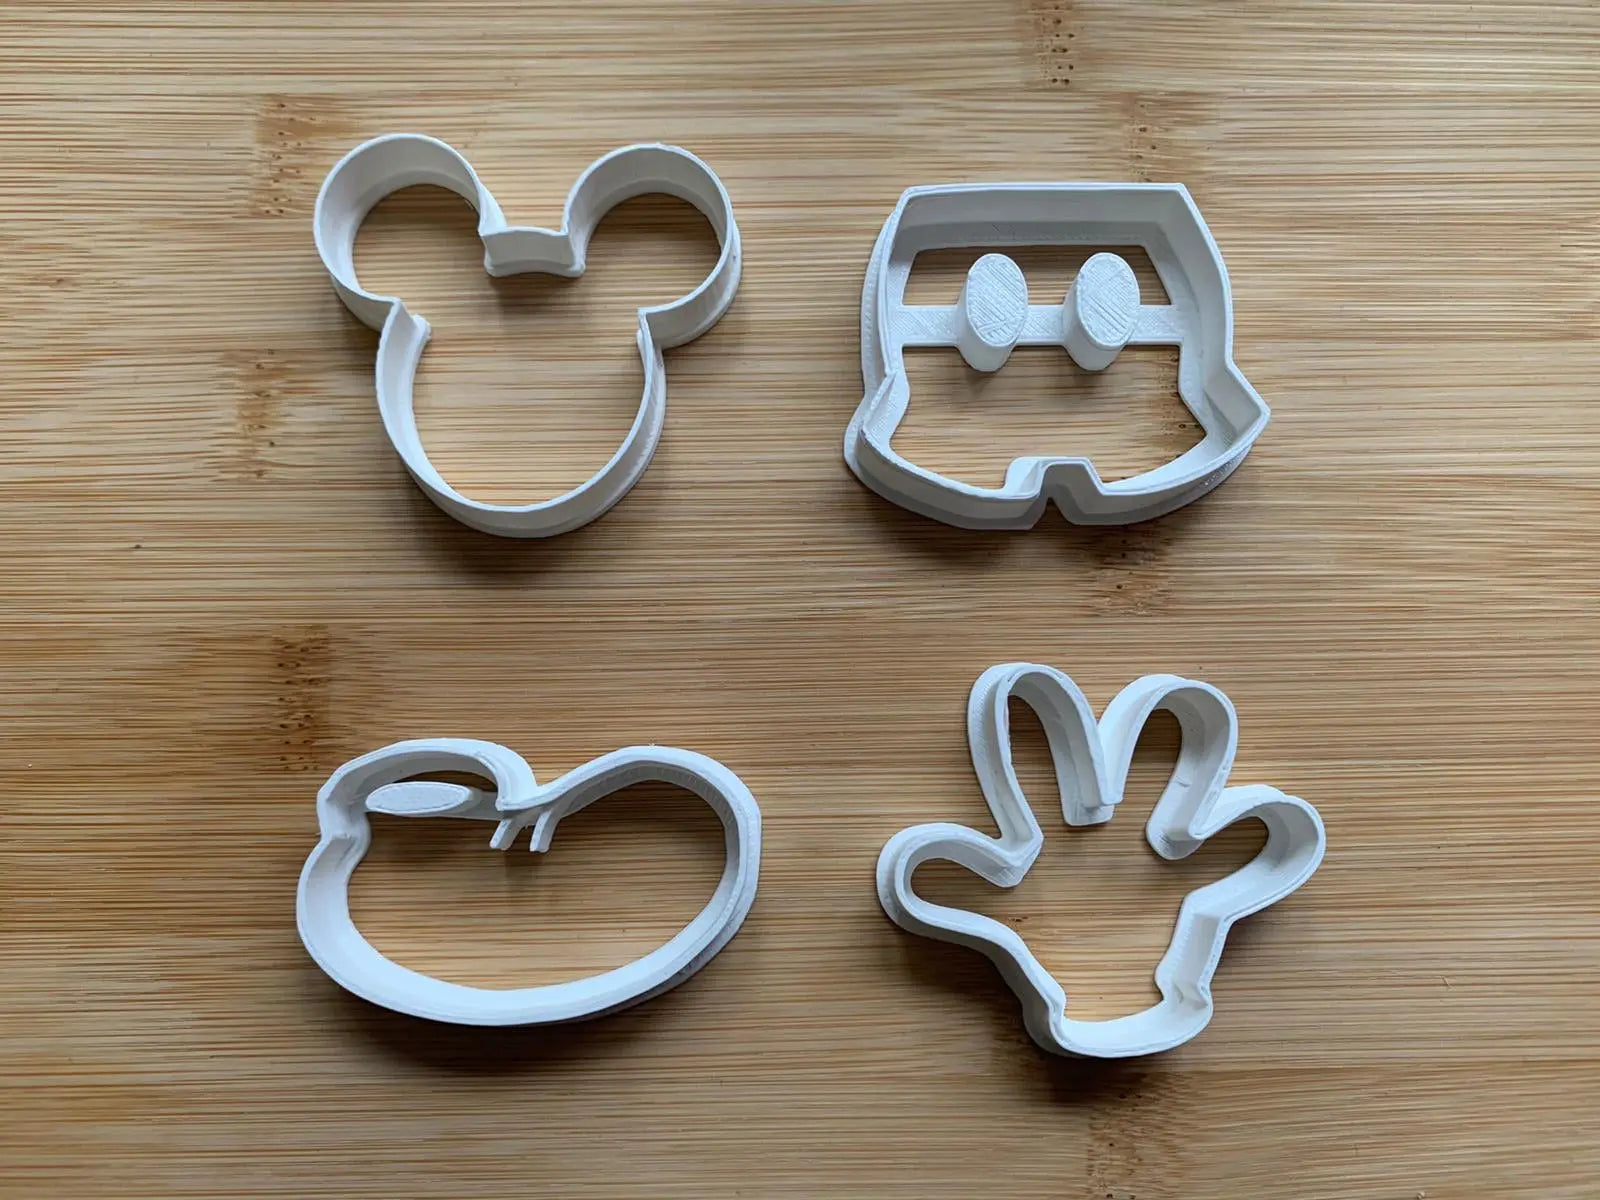 Mickey Mouse Cookie Cutters MEG cookie cutters